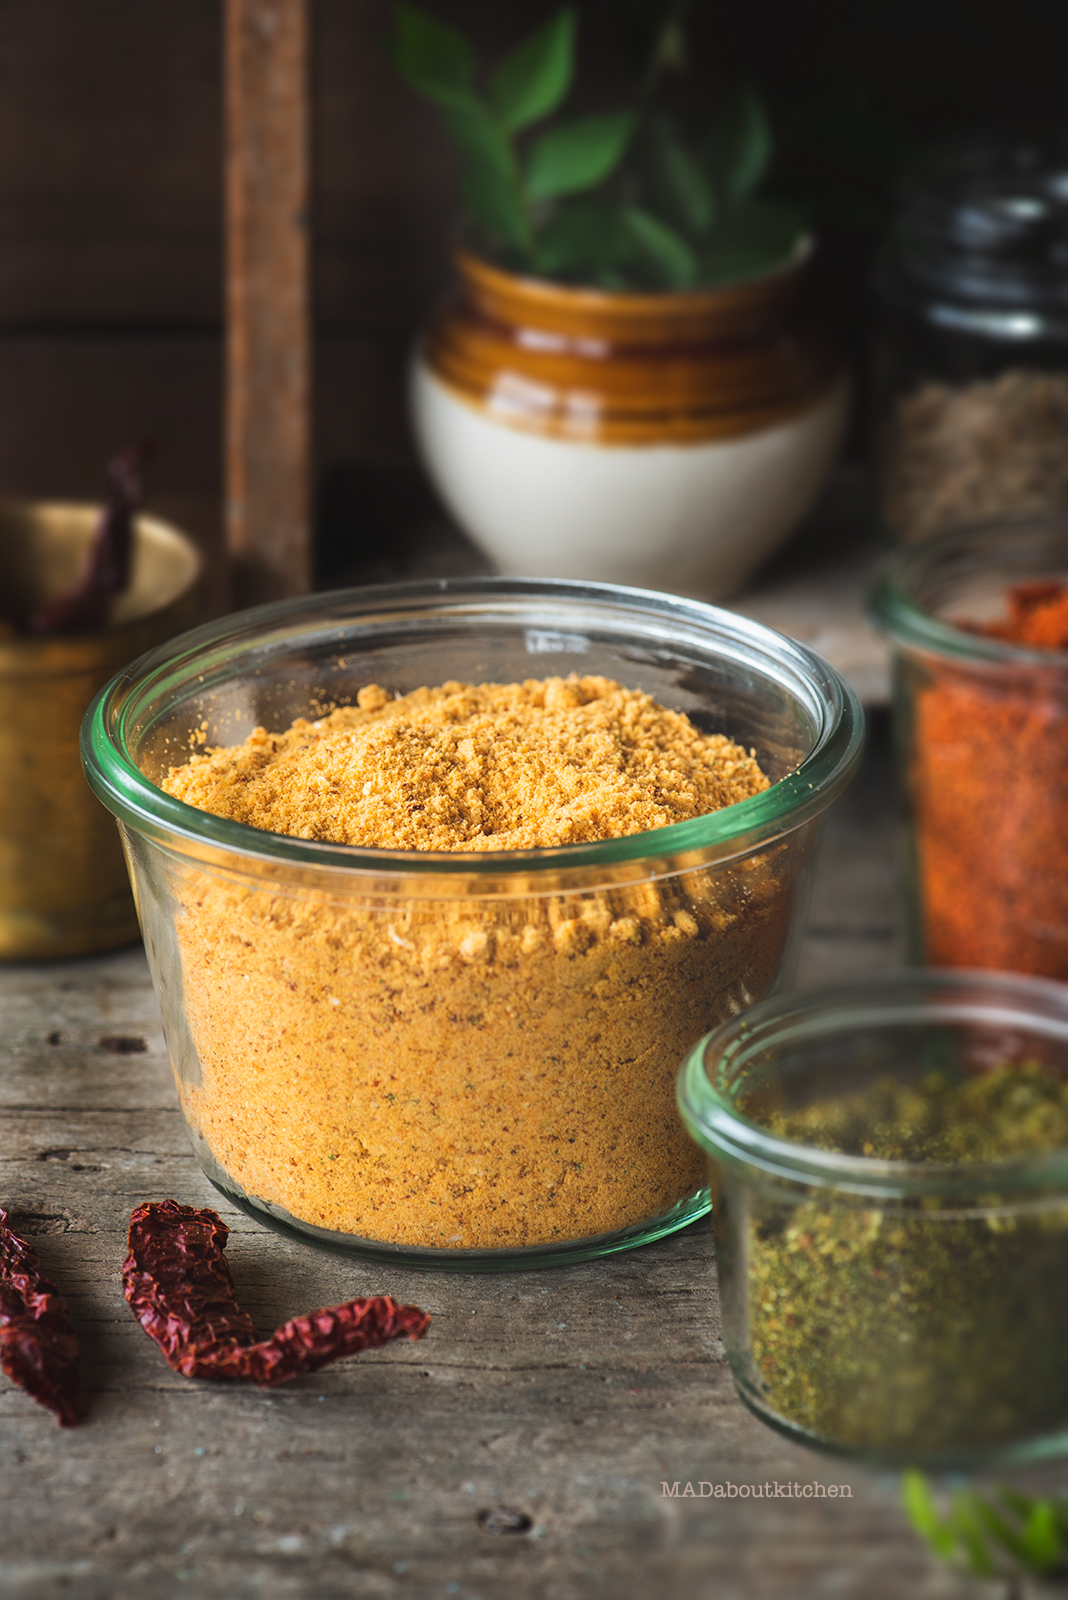 Andhra Style chutney powder or more famously known as Gunpowder is a spicy, garlic powder made using roasted lentils and powdered coarsely.